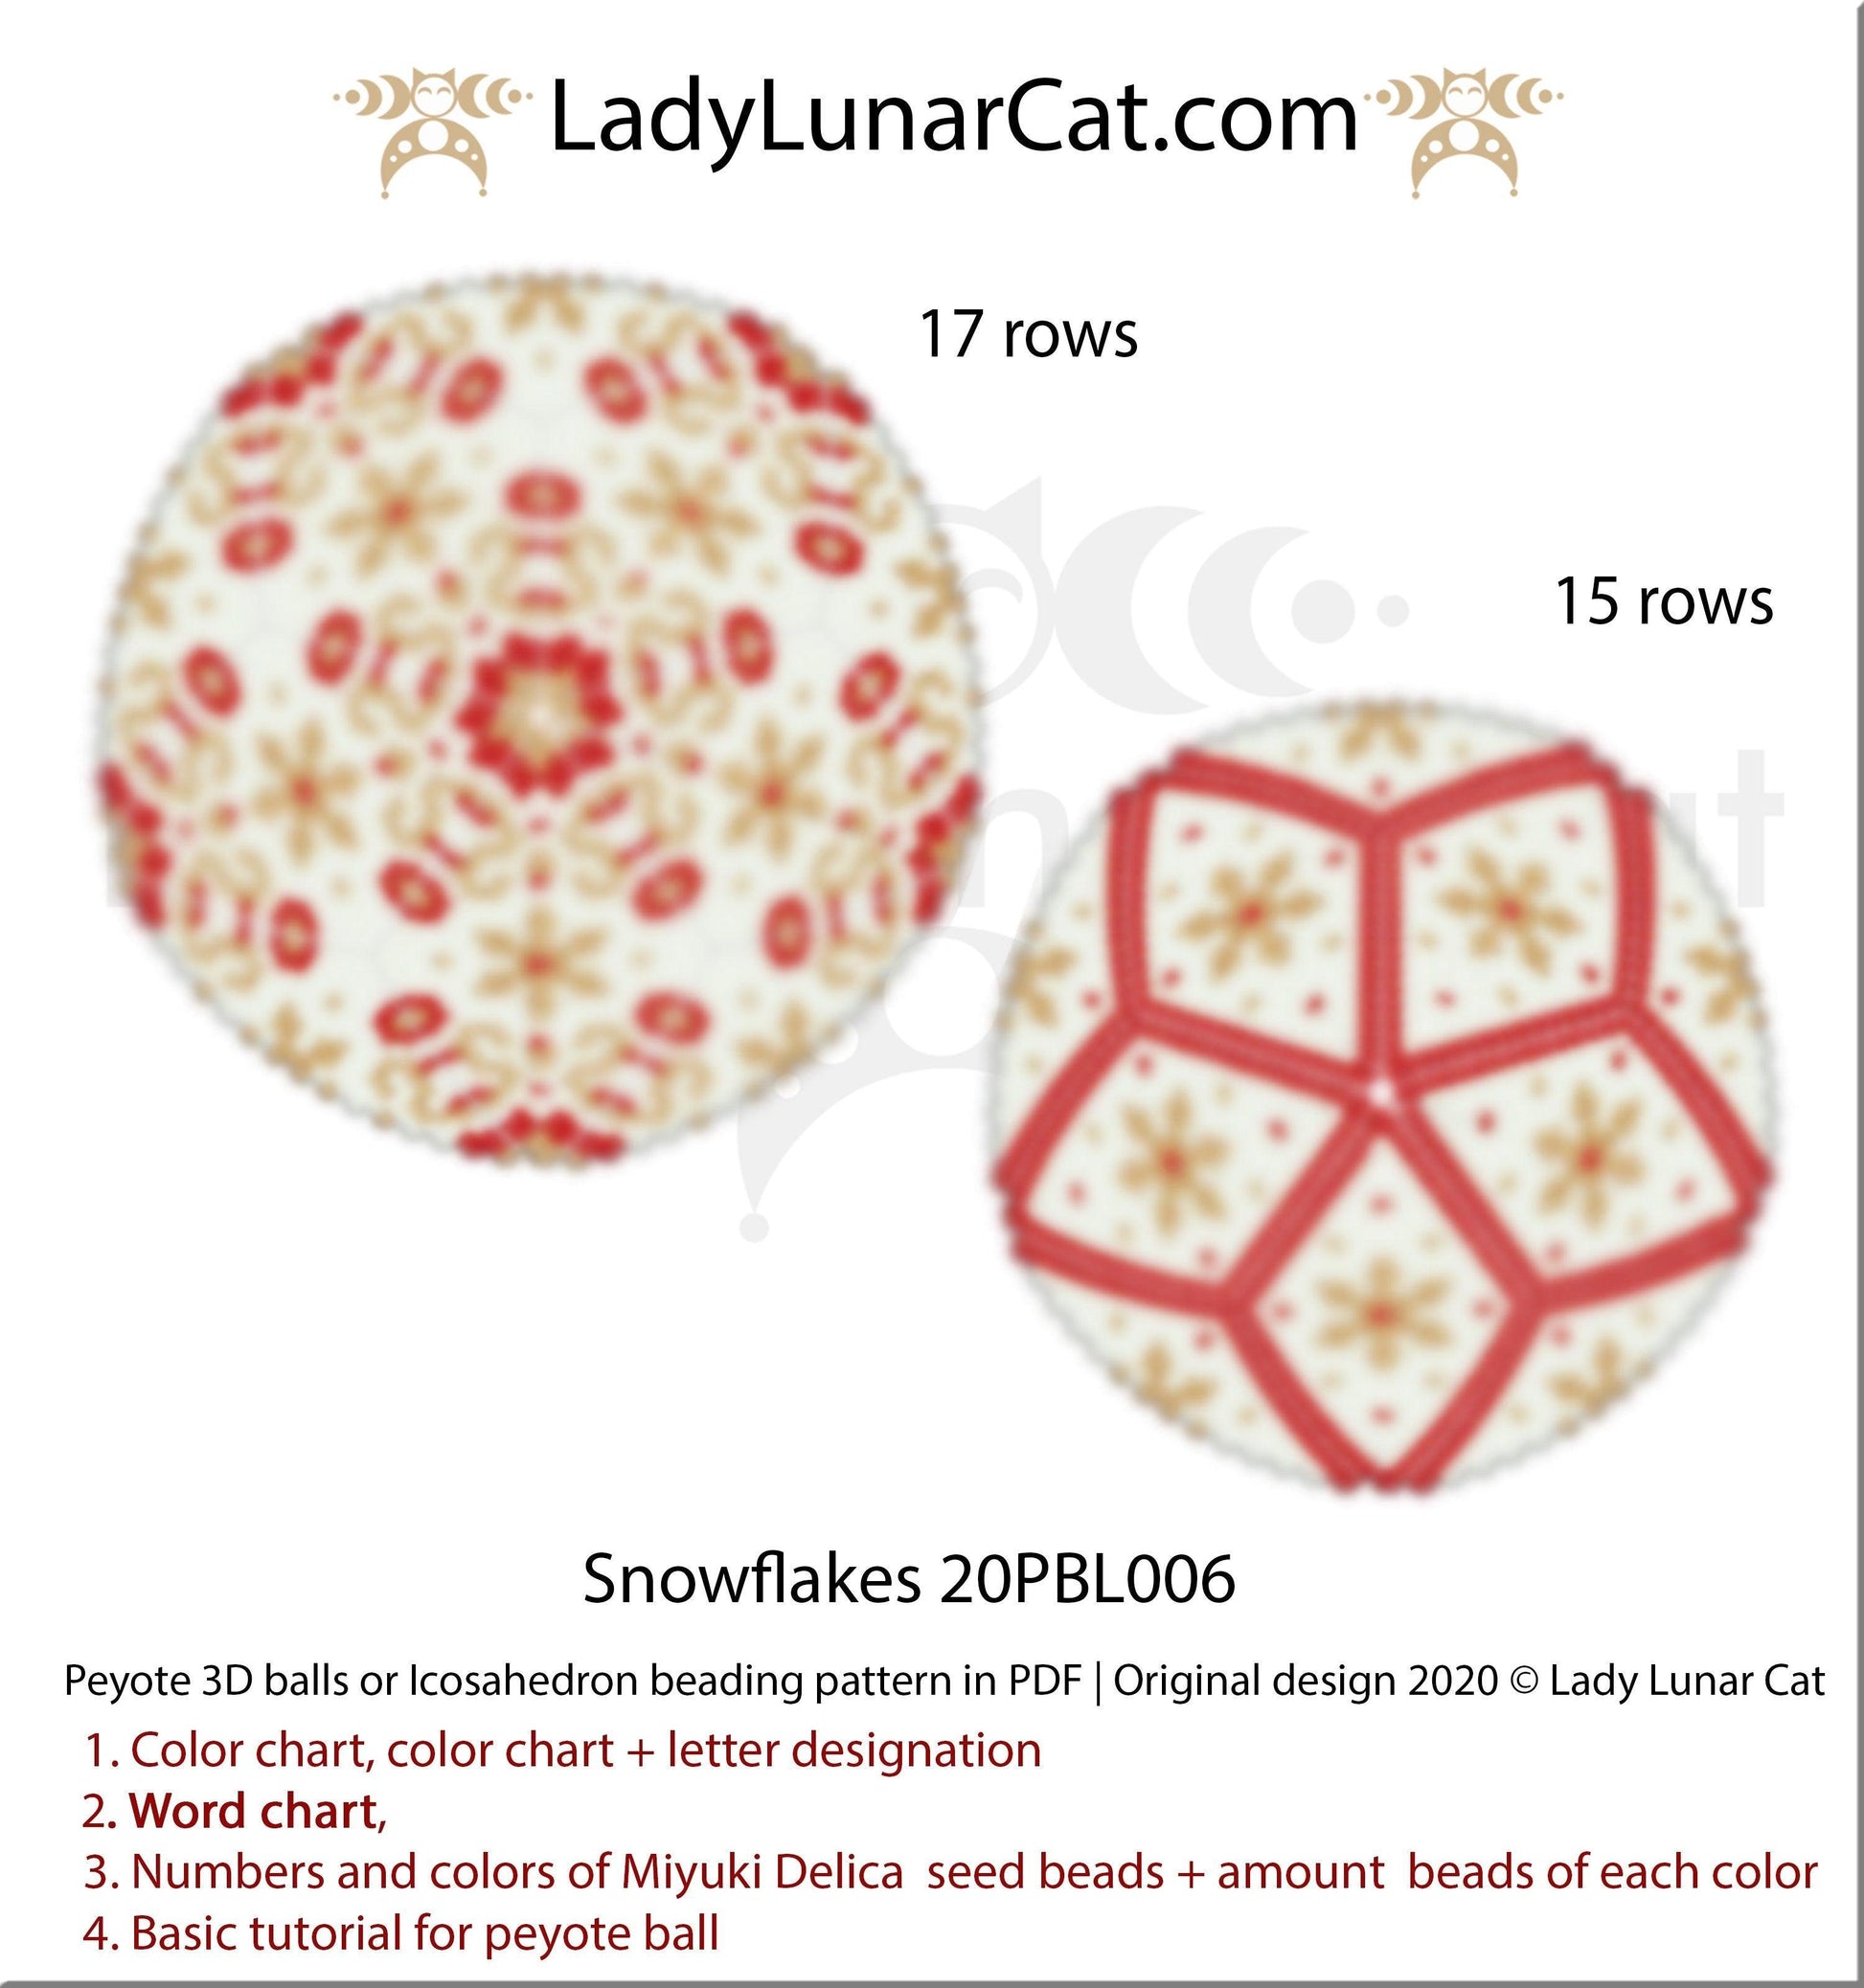 Peyote 3d ball pattern for beading | Beaded Icosahedron Snowflakes 20PBL006 17 rows and 15 rows LadyLunarCat